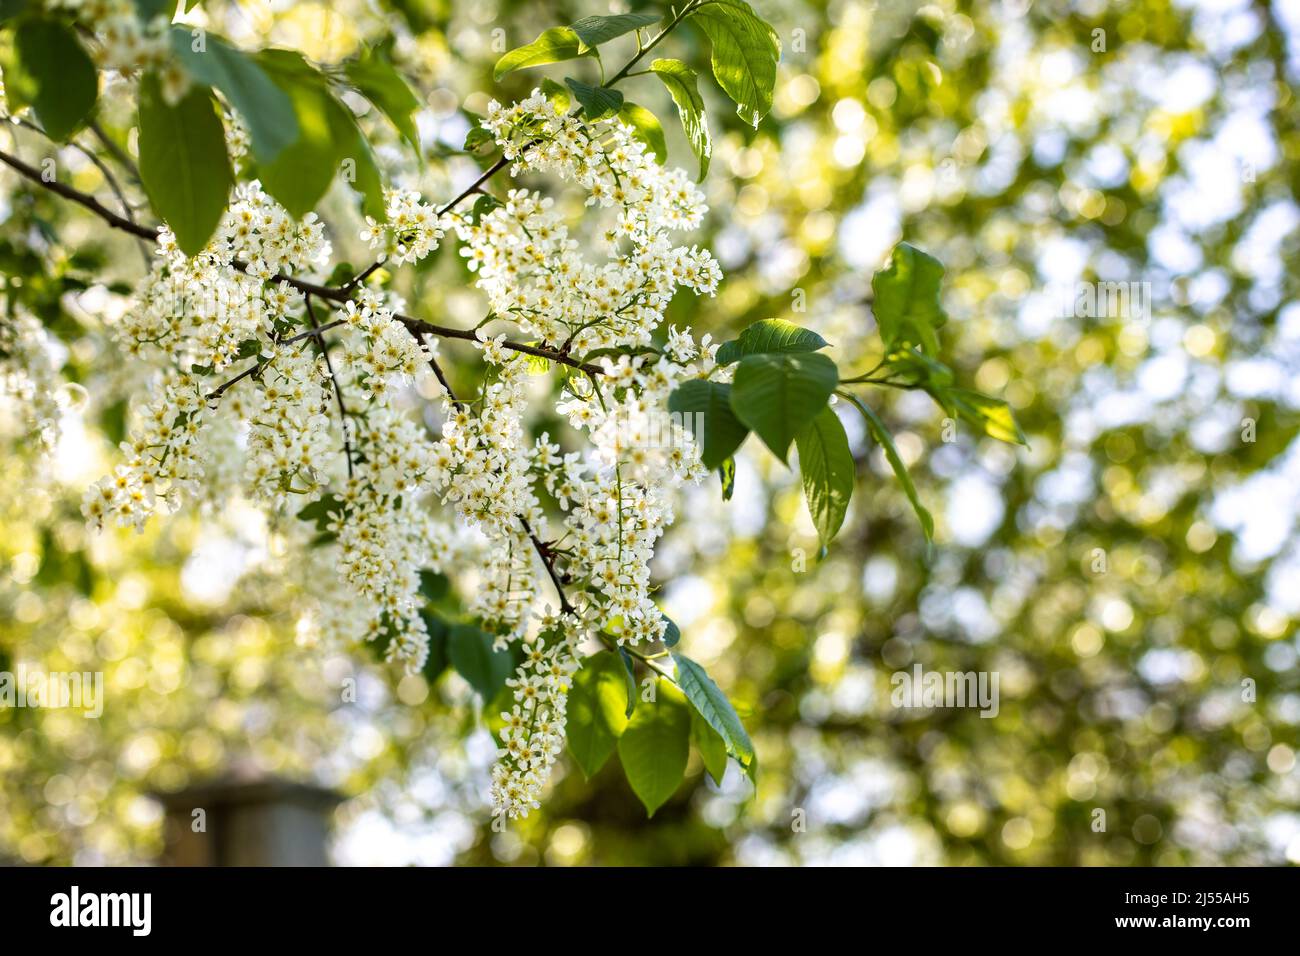 Branch of bird cherry Padus blossom with white flowers, spring flowering orchard. Nature renewal, natural bird cherry branch in bloom Stock Photo